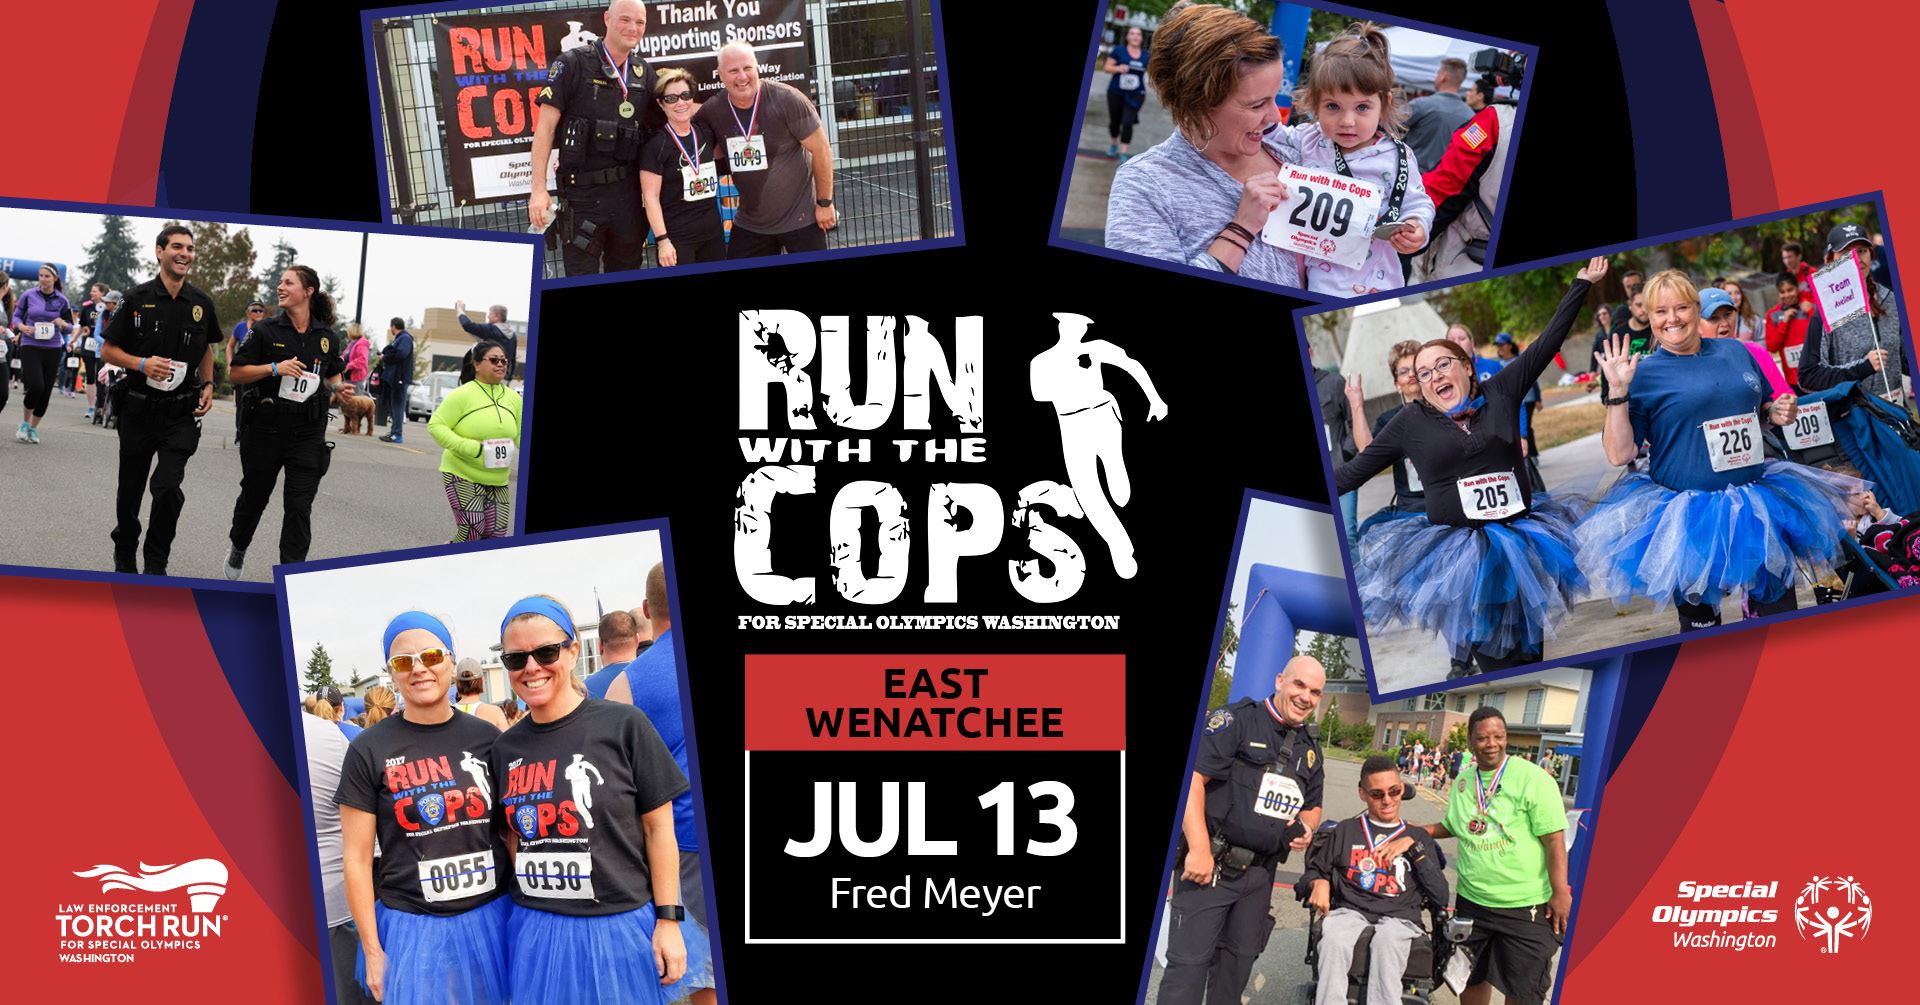 <h1 class="tribe-events-single-event-title">Run with the Cops 5K Run/Walk</h1>